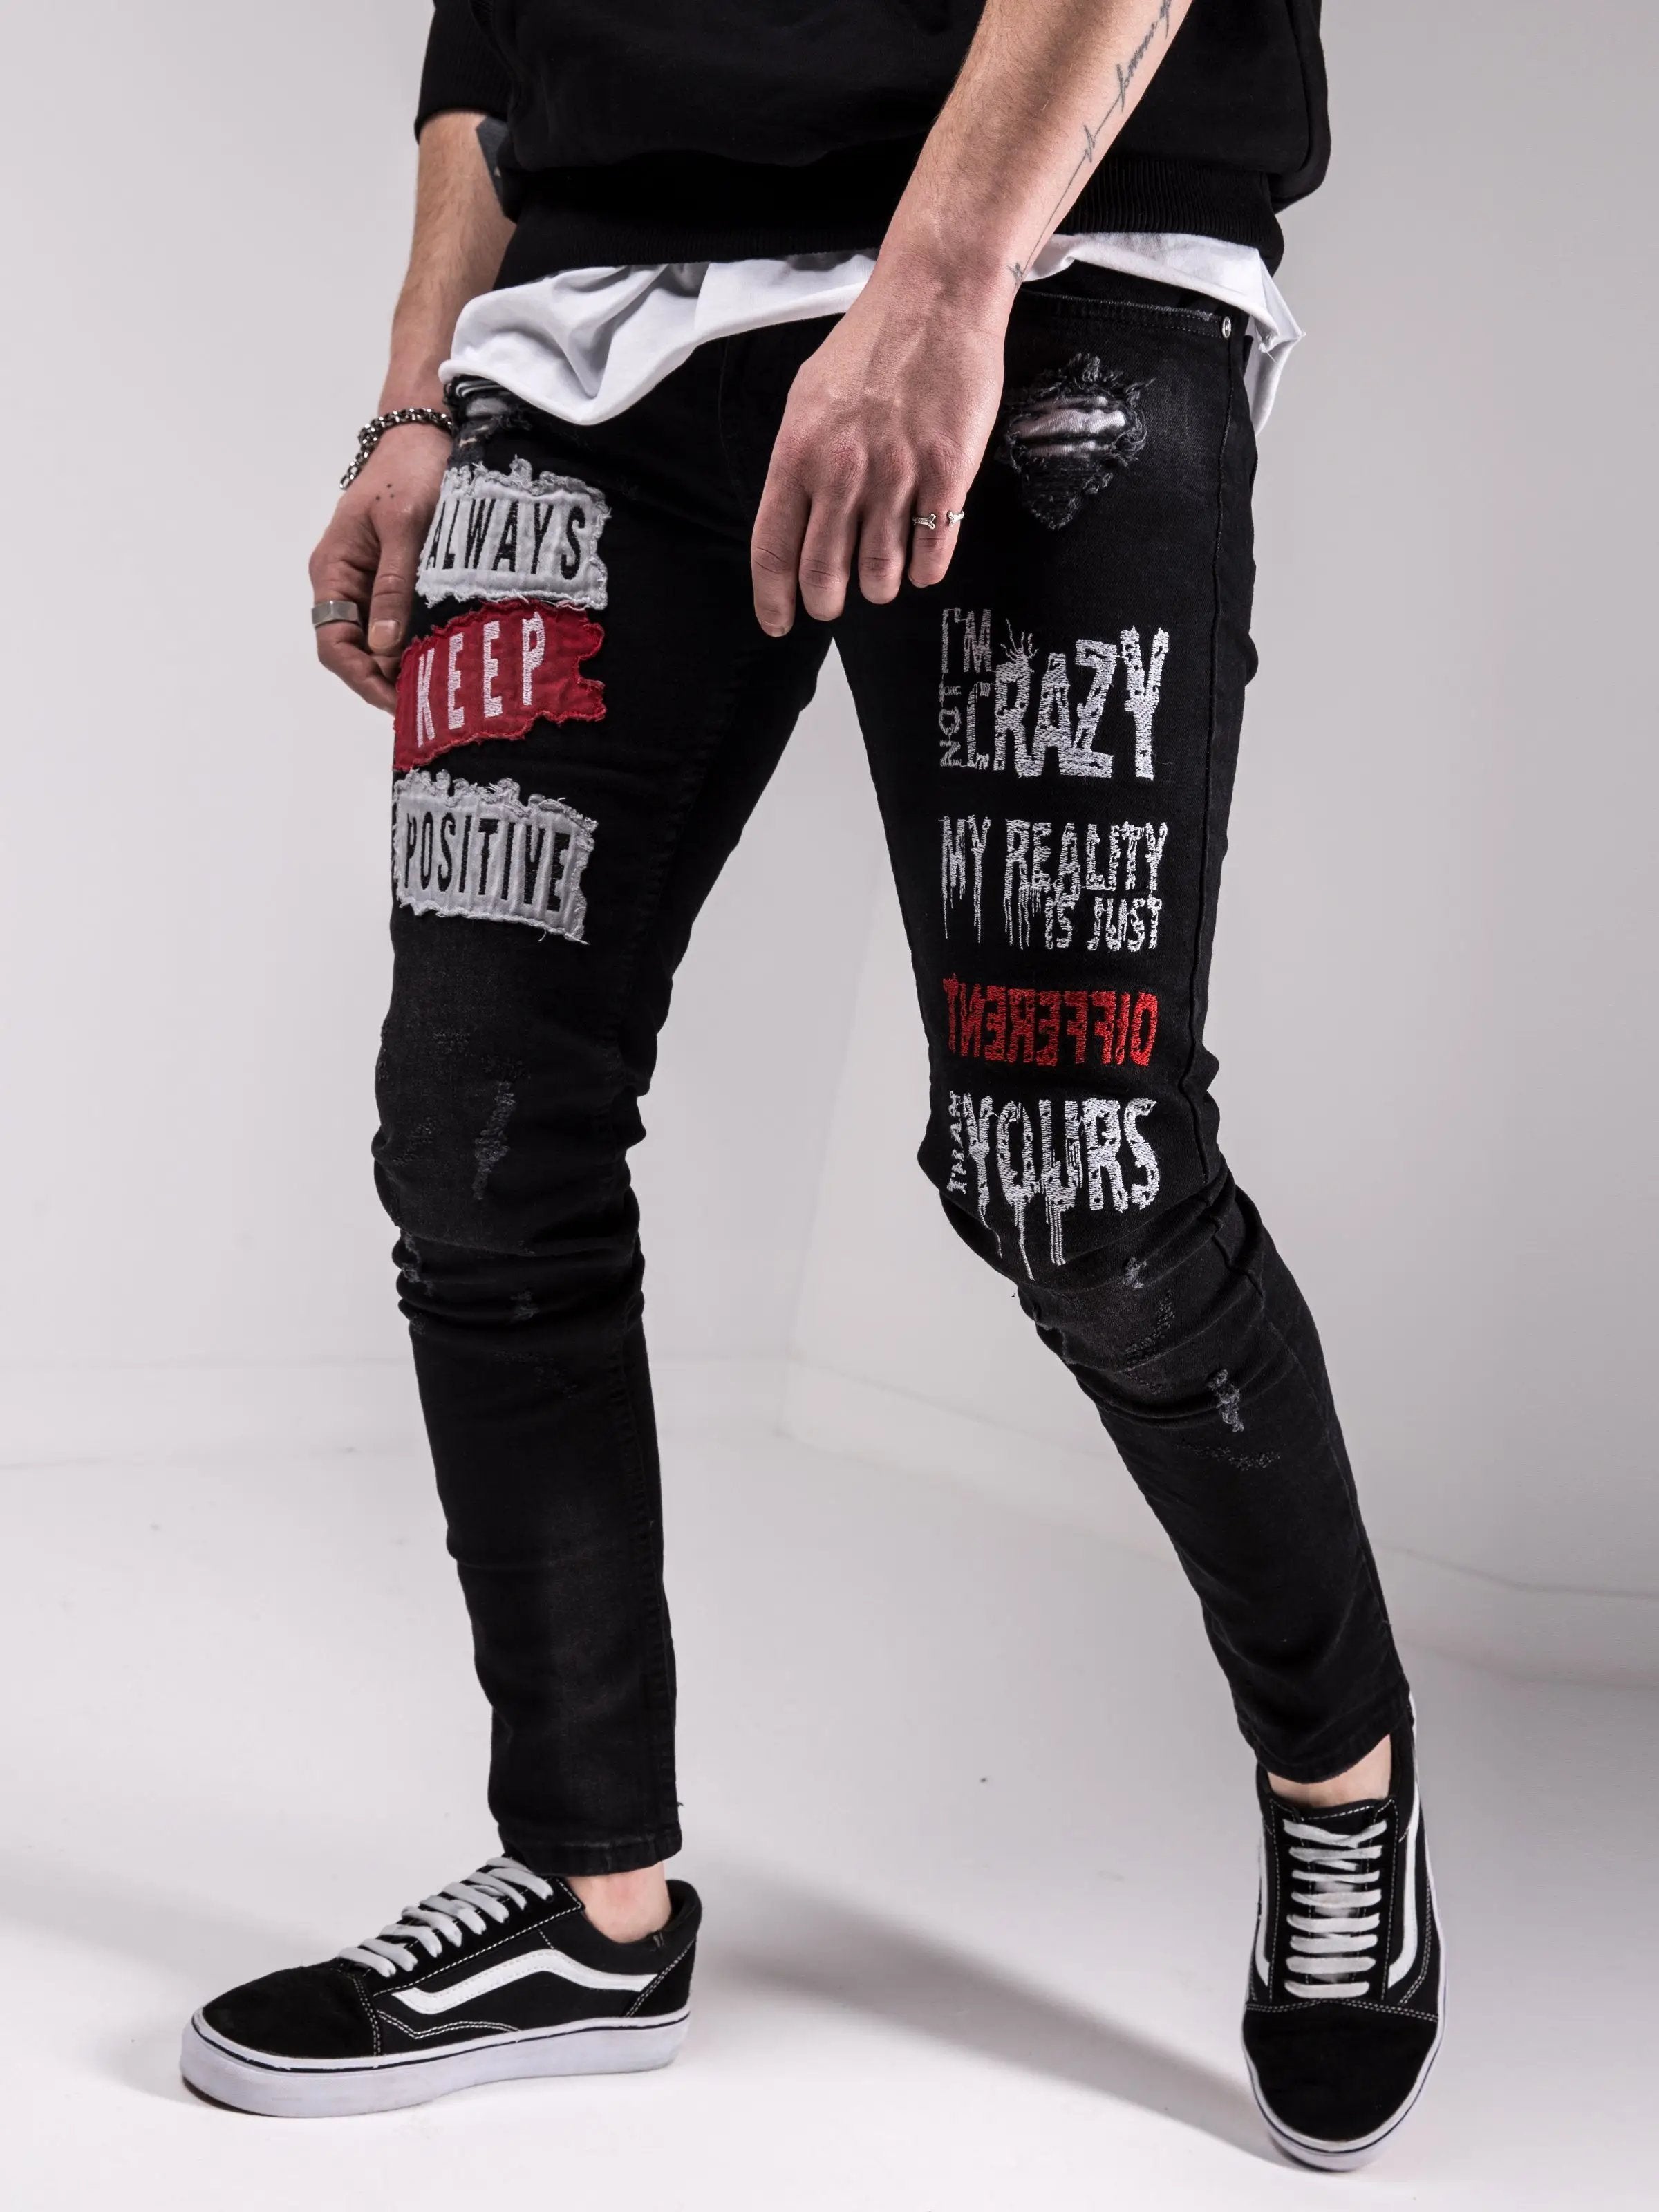 A man wearing a pair of I'M NOT CRAZY jeans with graffiti on them.